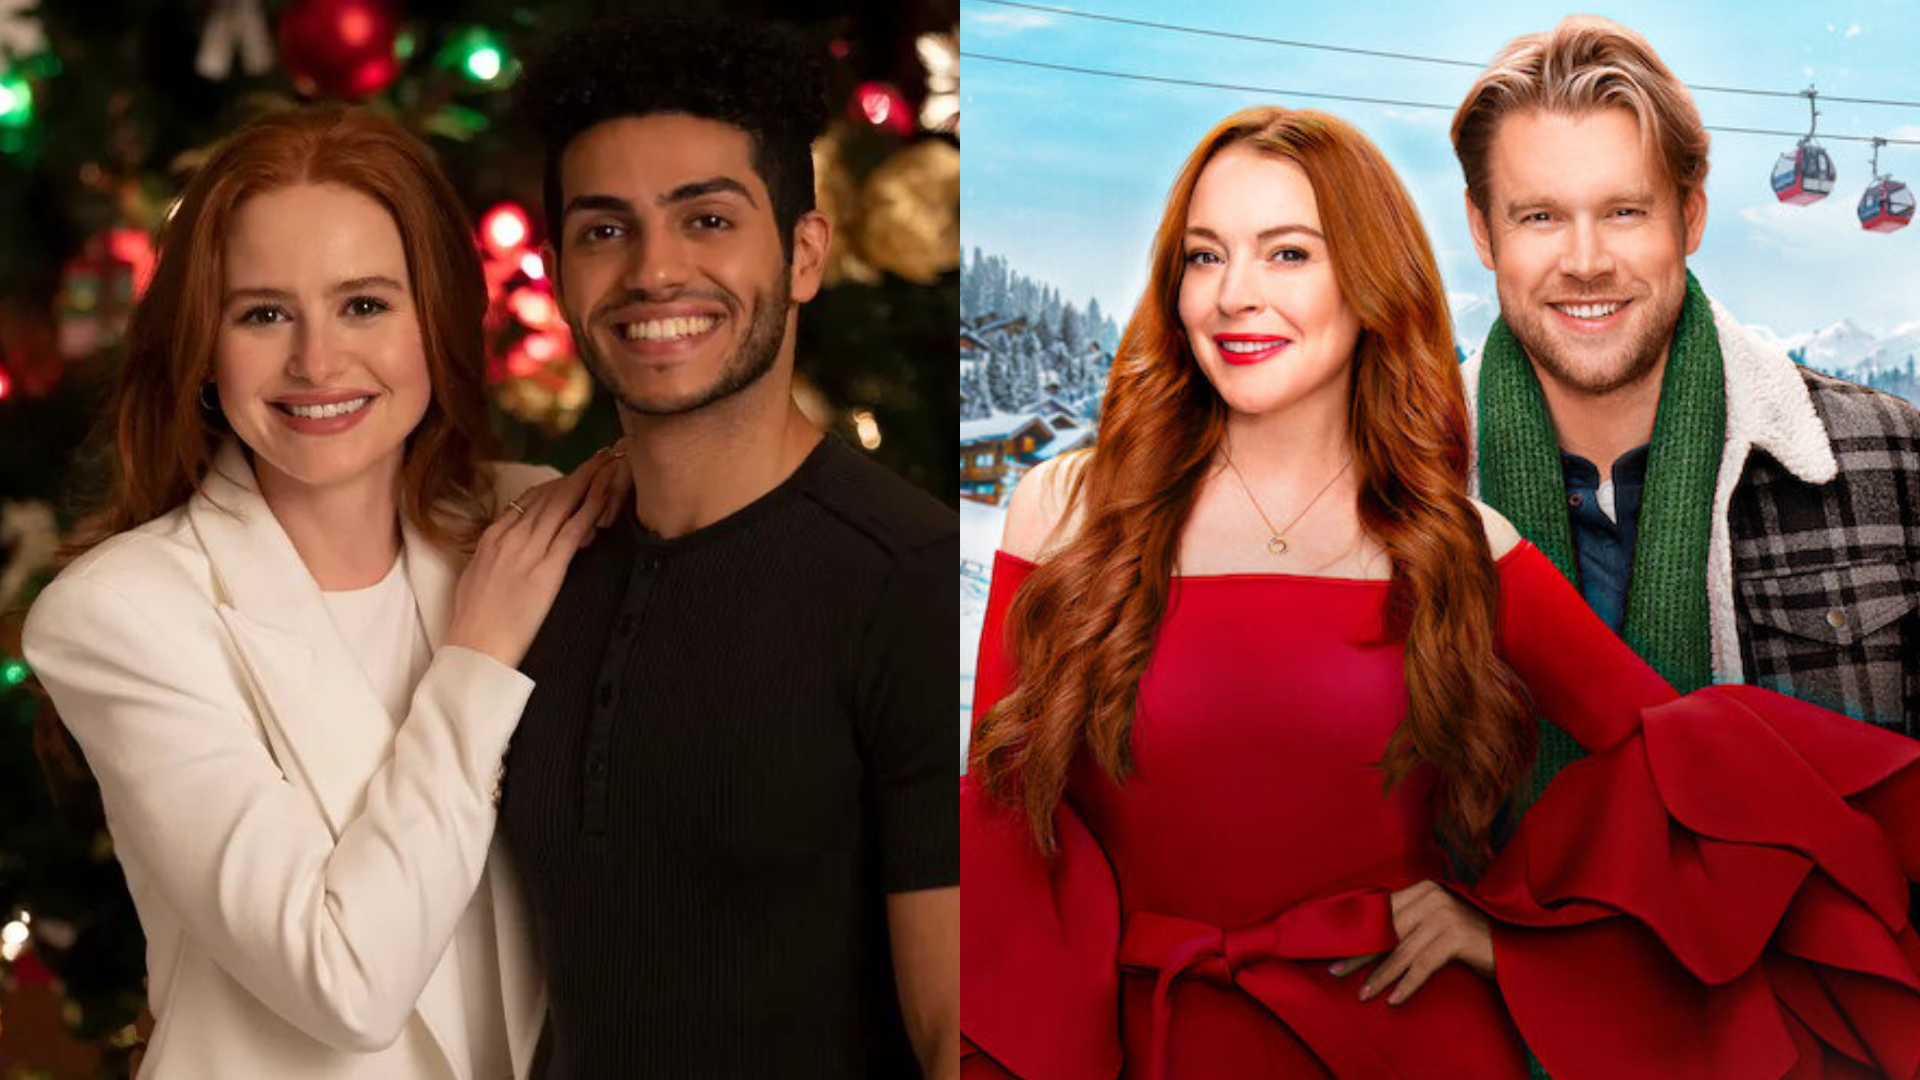 New Holiday Movies with Redhead Leads for 2022